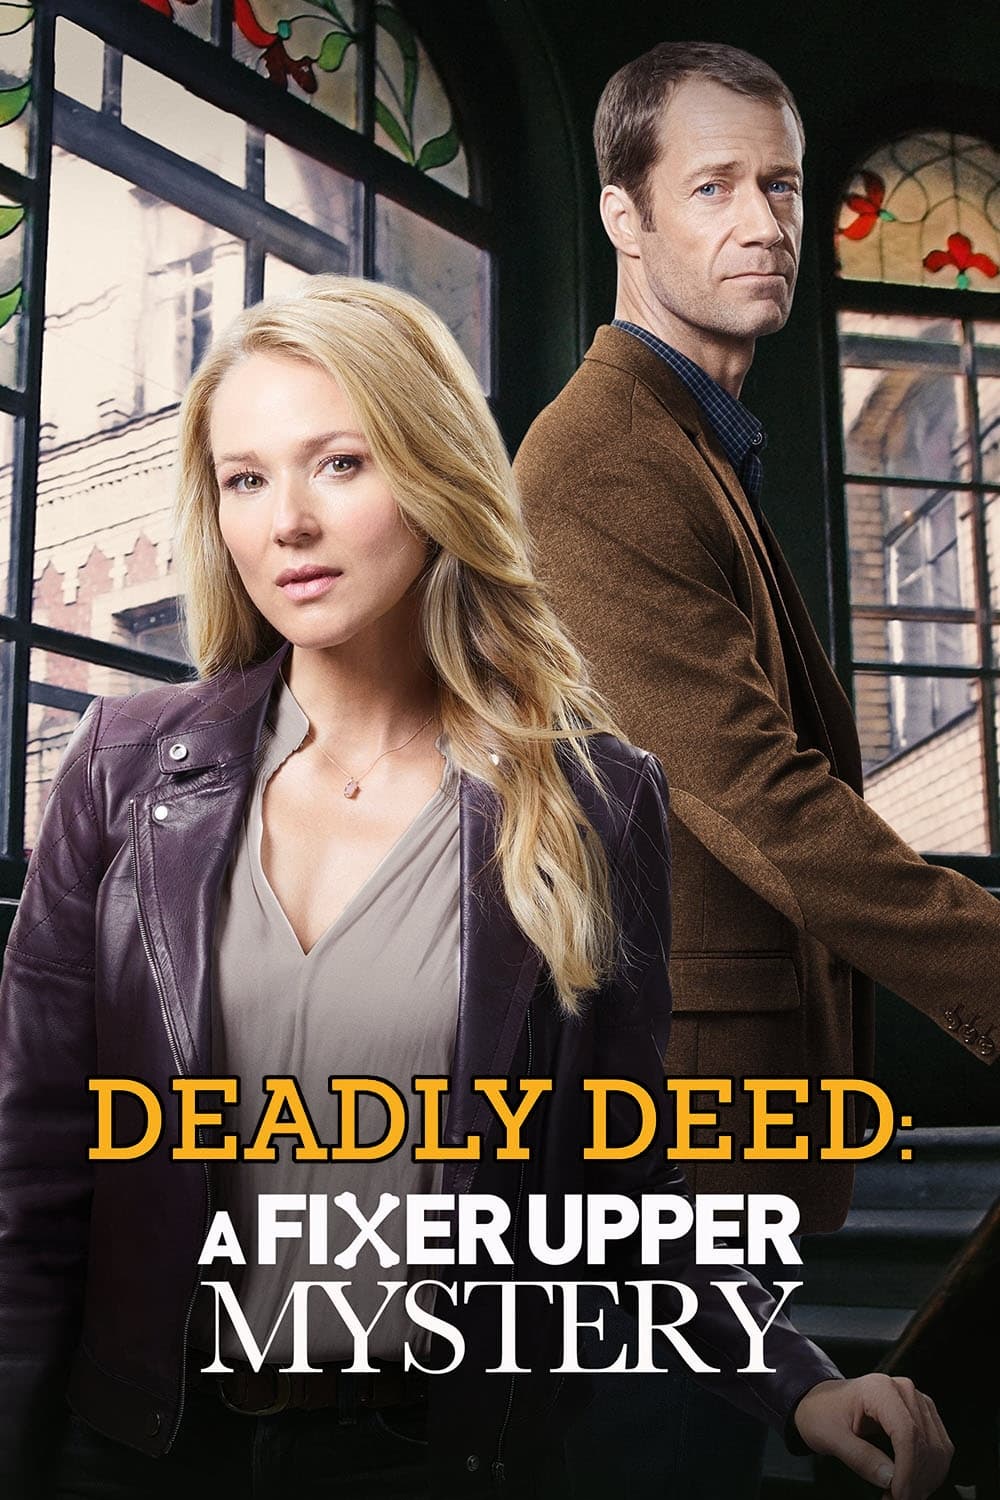 Deadly Deed: A Fixer Upper Mystery (2018)